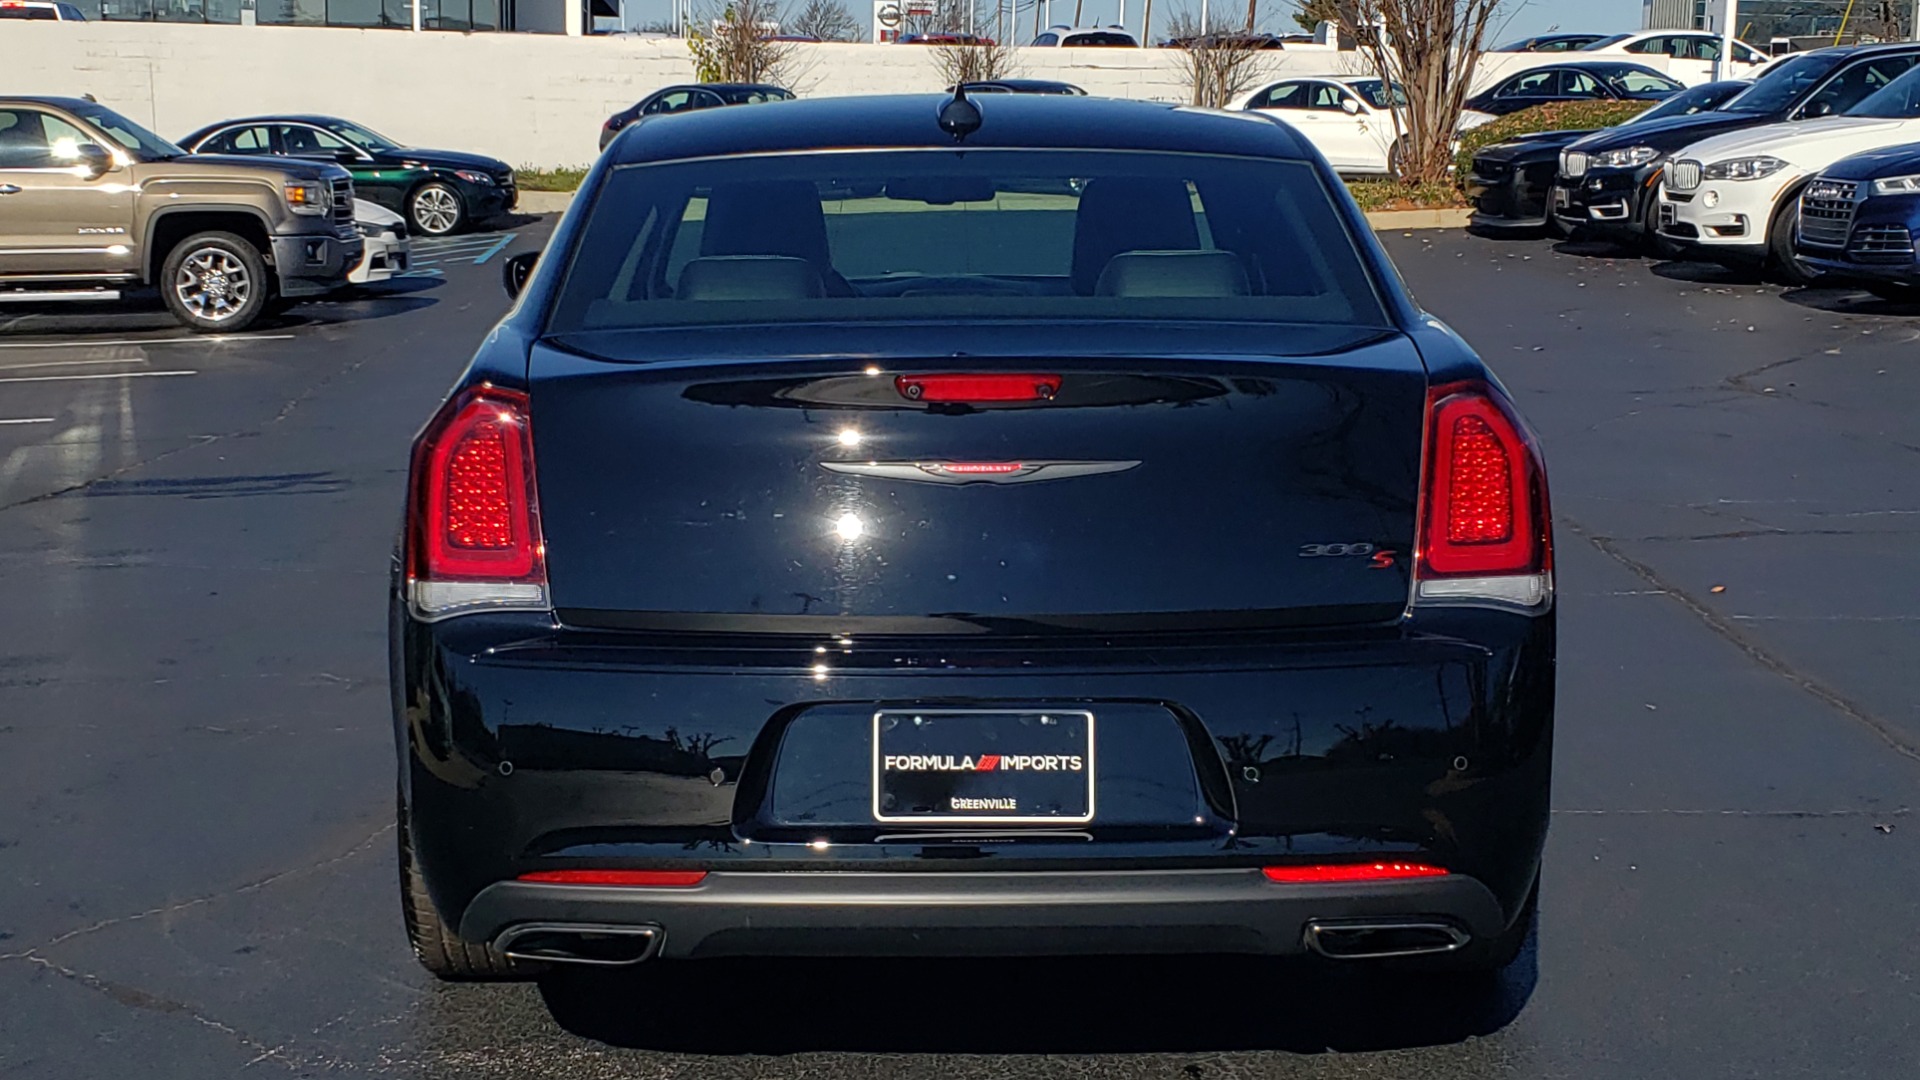 Used 2021 Chrysler 300 S 3.6L SEDAN / AUTO / NAV / HTD STS / UCONNECT 8.4-IN DISPLAY / REARVIEW for sale Sold at Formula Imports in Charlotte NC 28227 25